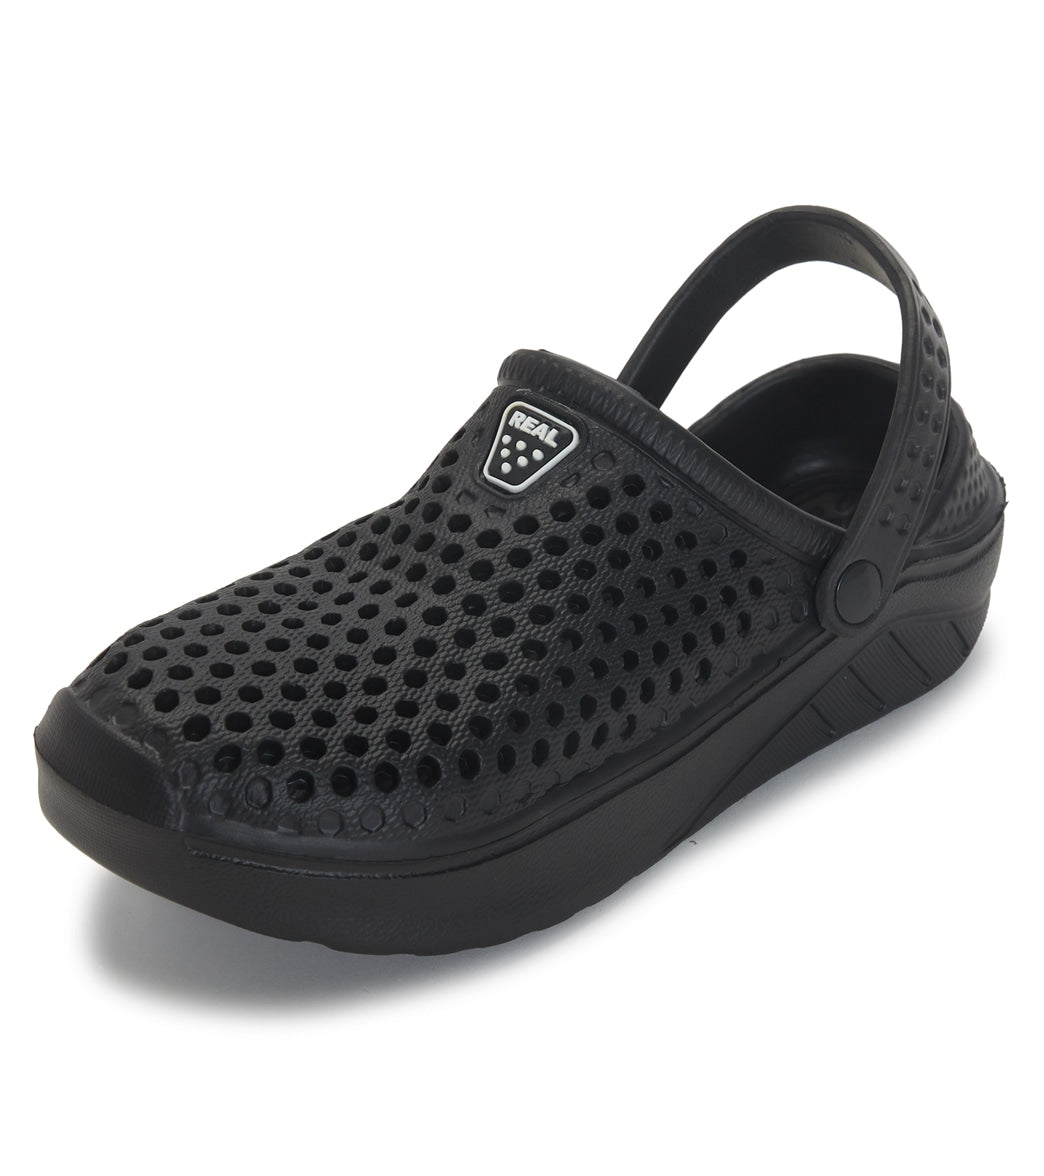 Easy USA Youth Clog Sandals (Little Kid, Big Kid) at SwimOutlet.com